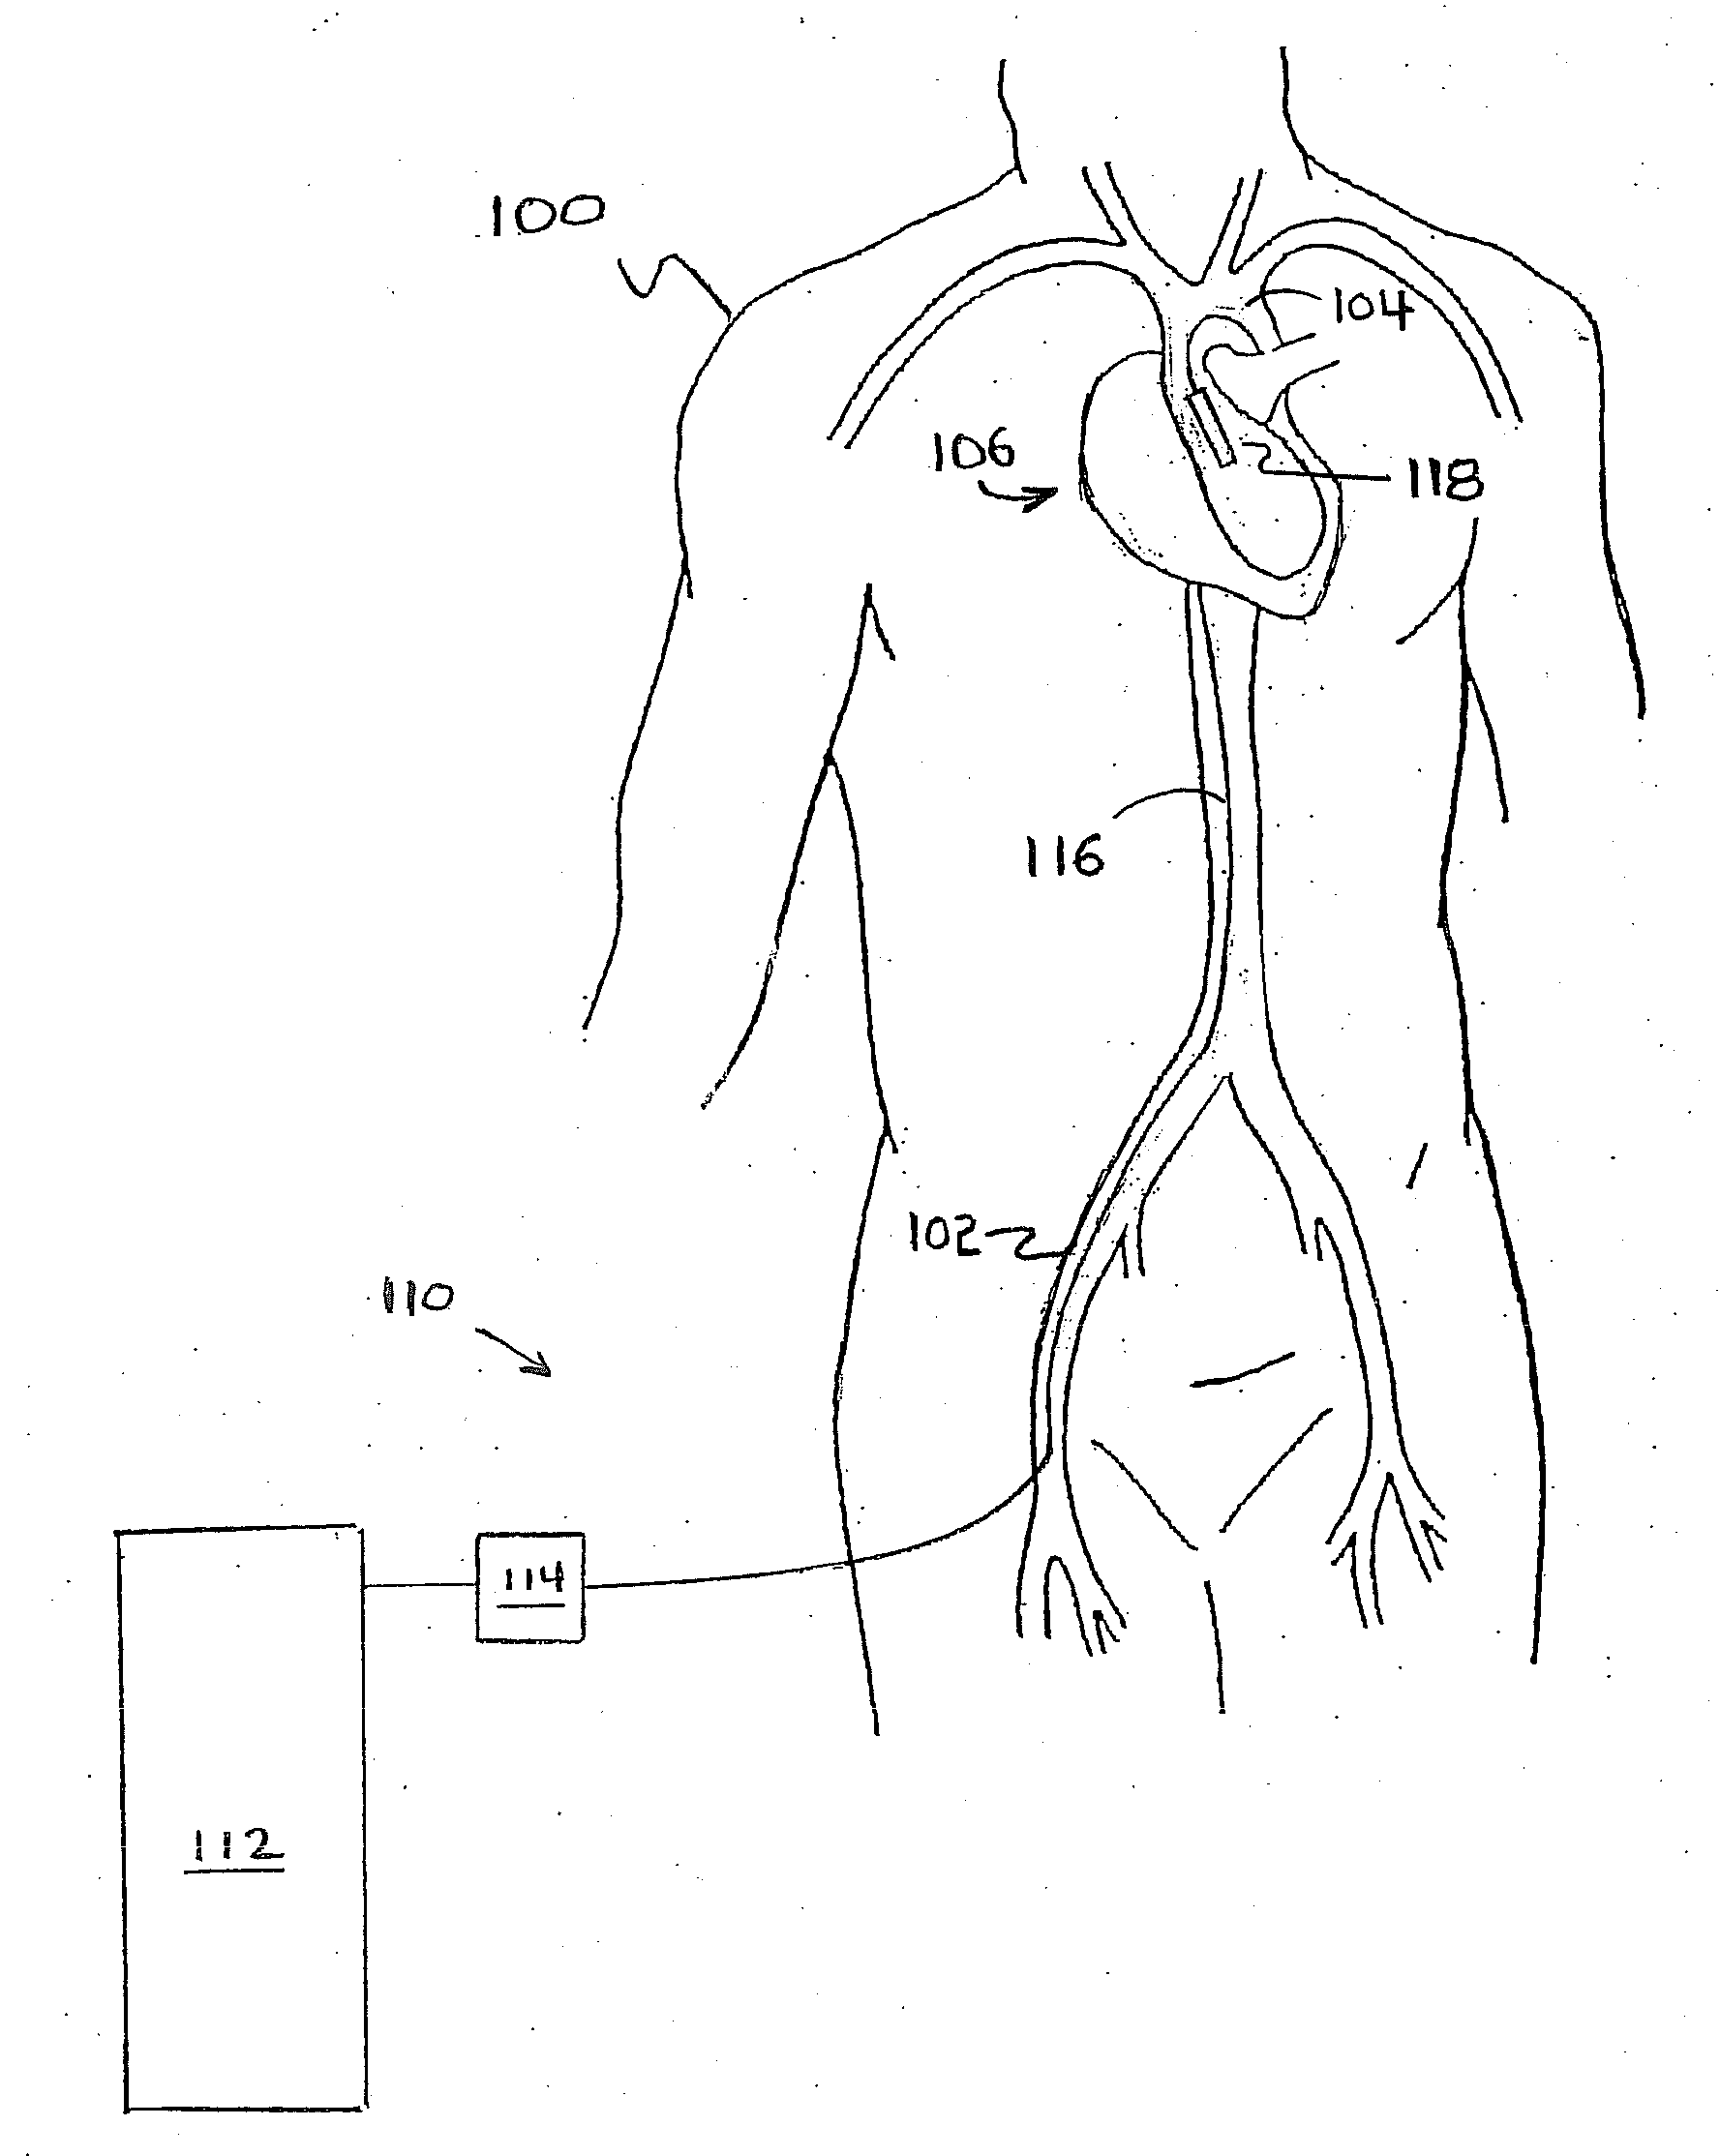 Method for Deployment of a Medical Device